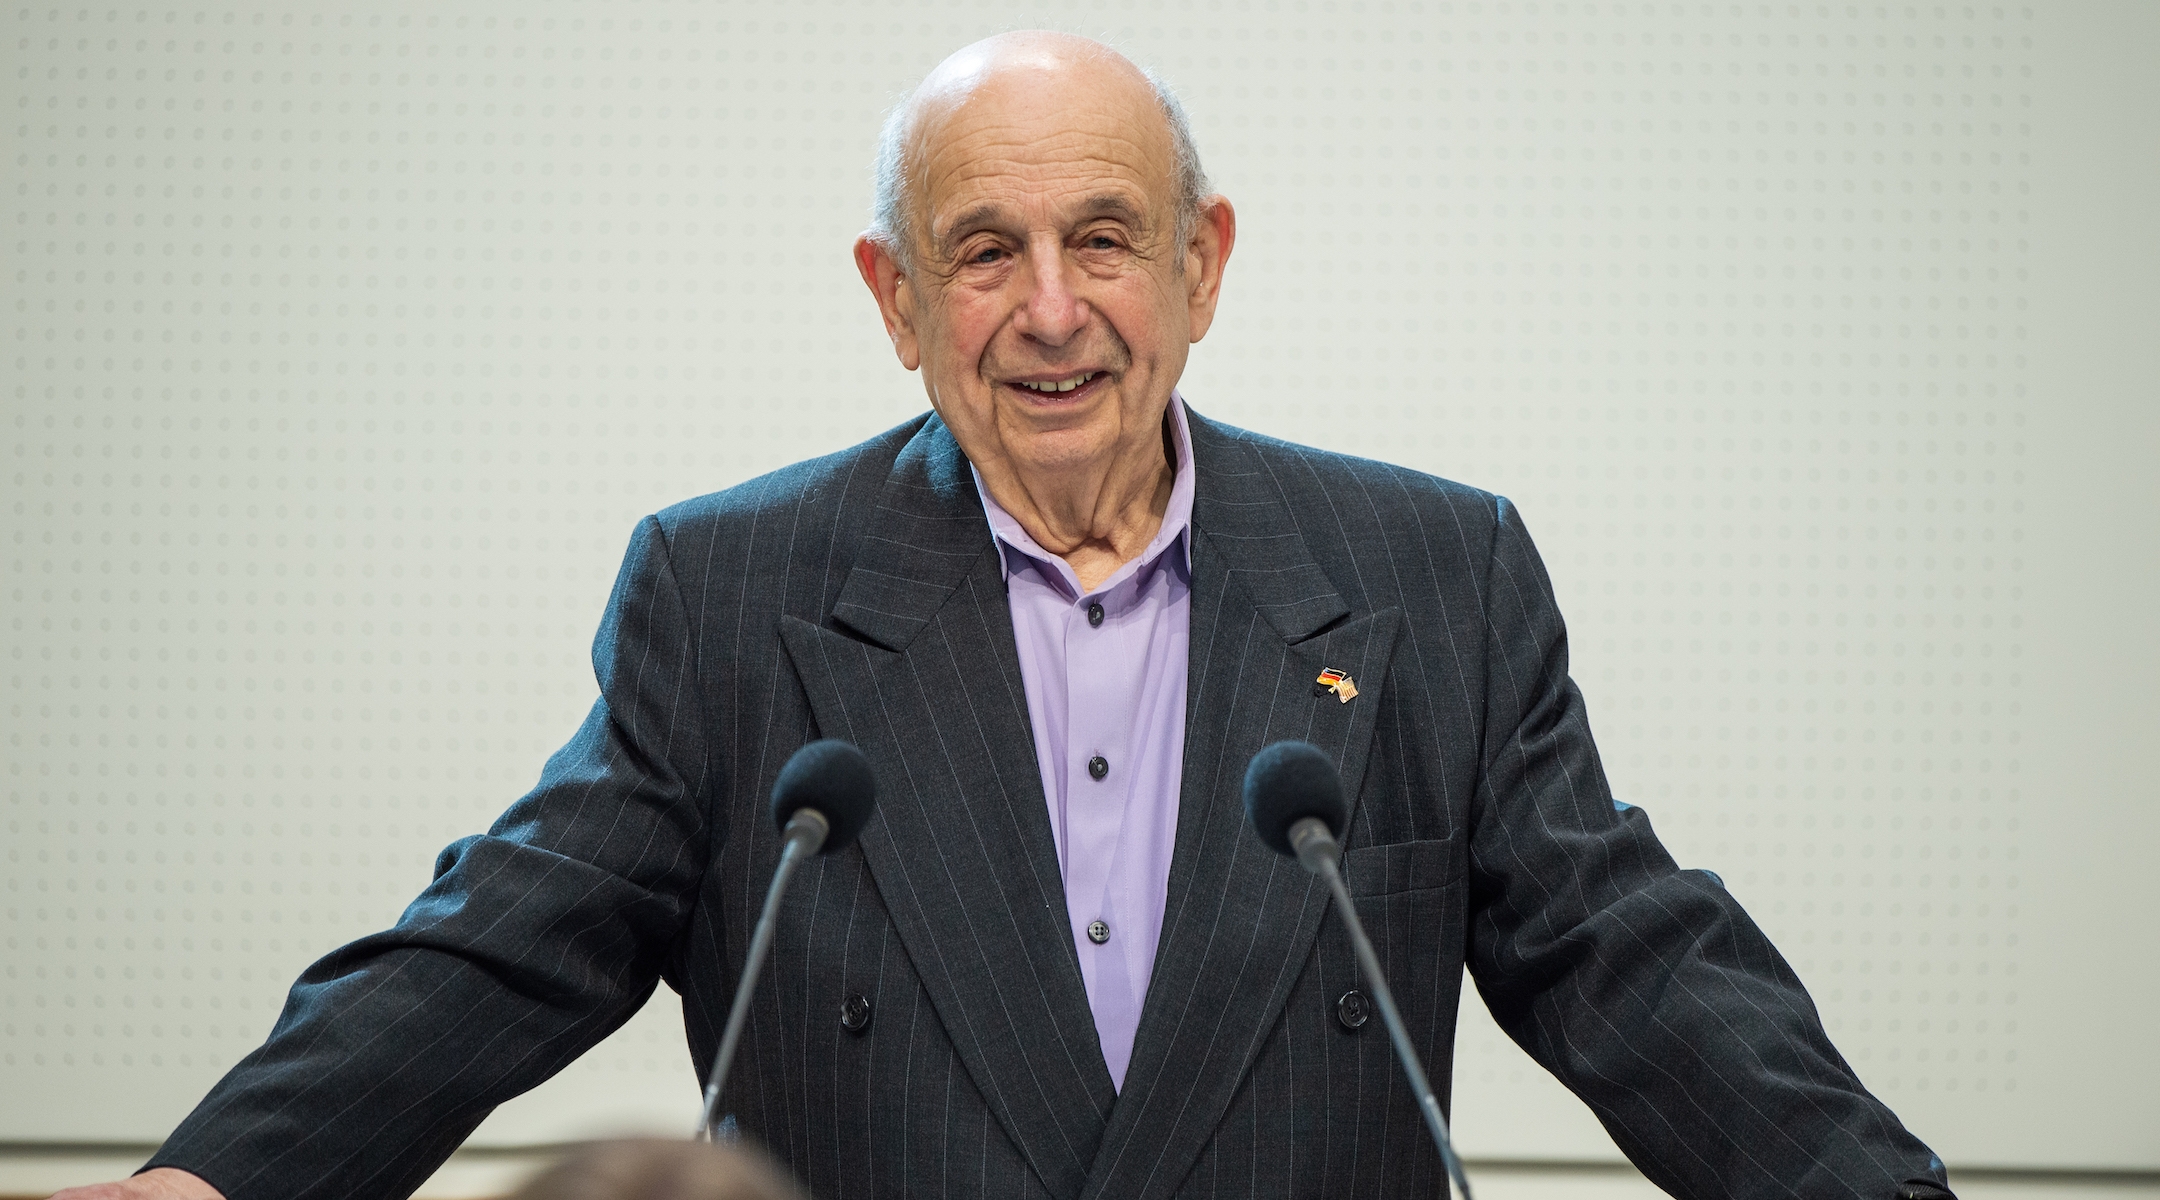 Guy Stern, who escaped Germany in the run-up to the Holocaust, speaks to a group of lawmakers in Hanover, Germany, May 14, 2019. (Christophe Gateau/picture alliance via Getty Images)